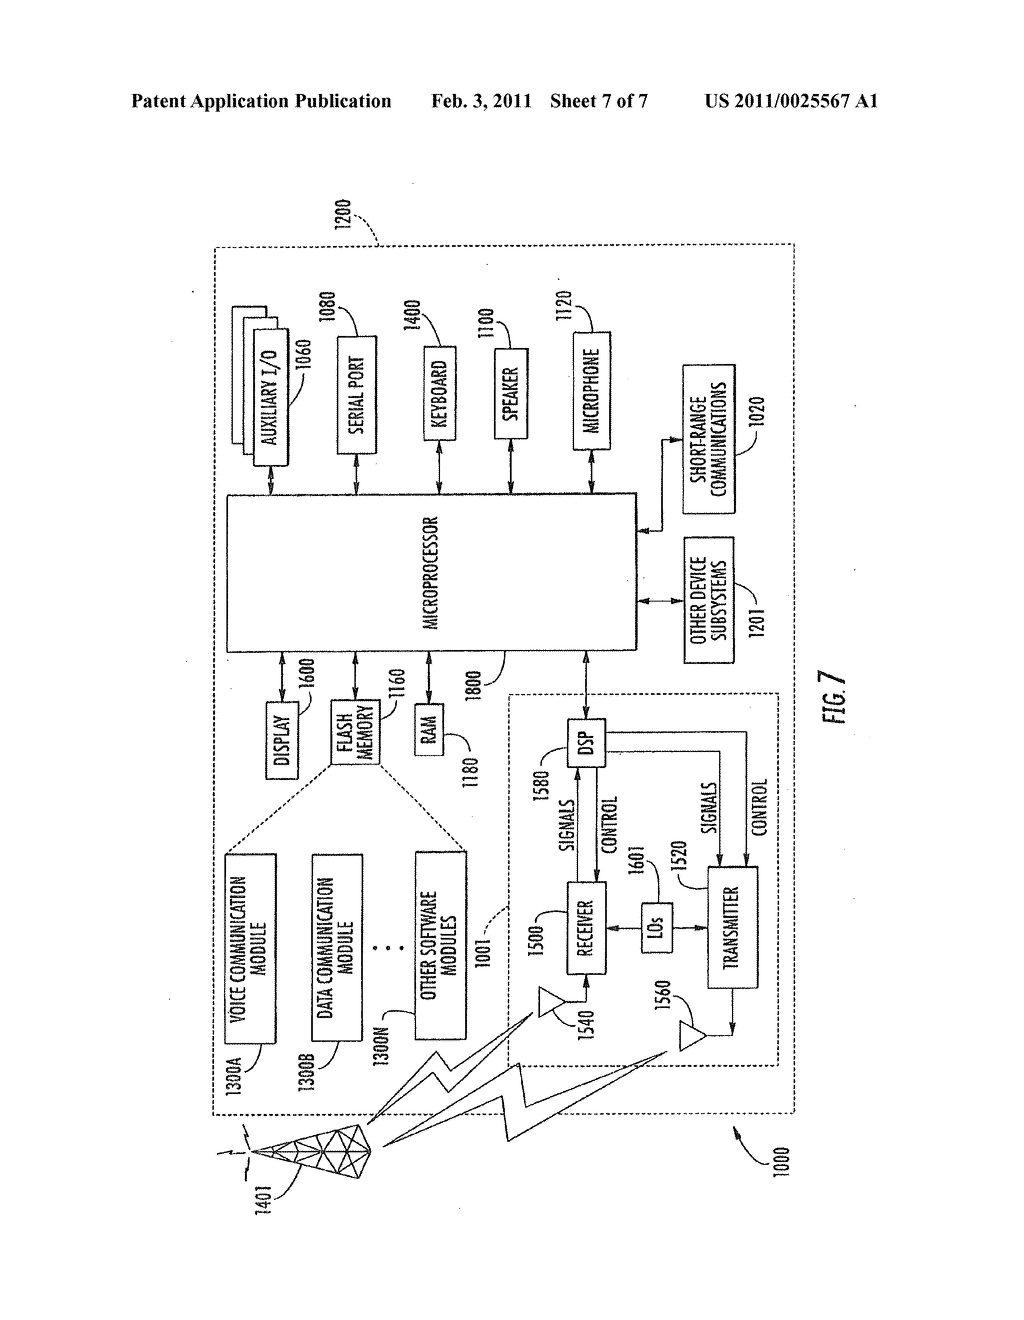 MOBILE WIRELESS COMMUNICATIONS DEVICE ANTENNA ASSEMBLY WITH ANTENNA ELEMENT AND FLOATING DIRECTOR ELEMENT ON FLEXIBLE SUBSTRATE AND RELATED METHODS - diagram, schematic, and image 08